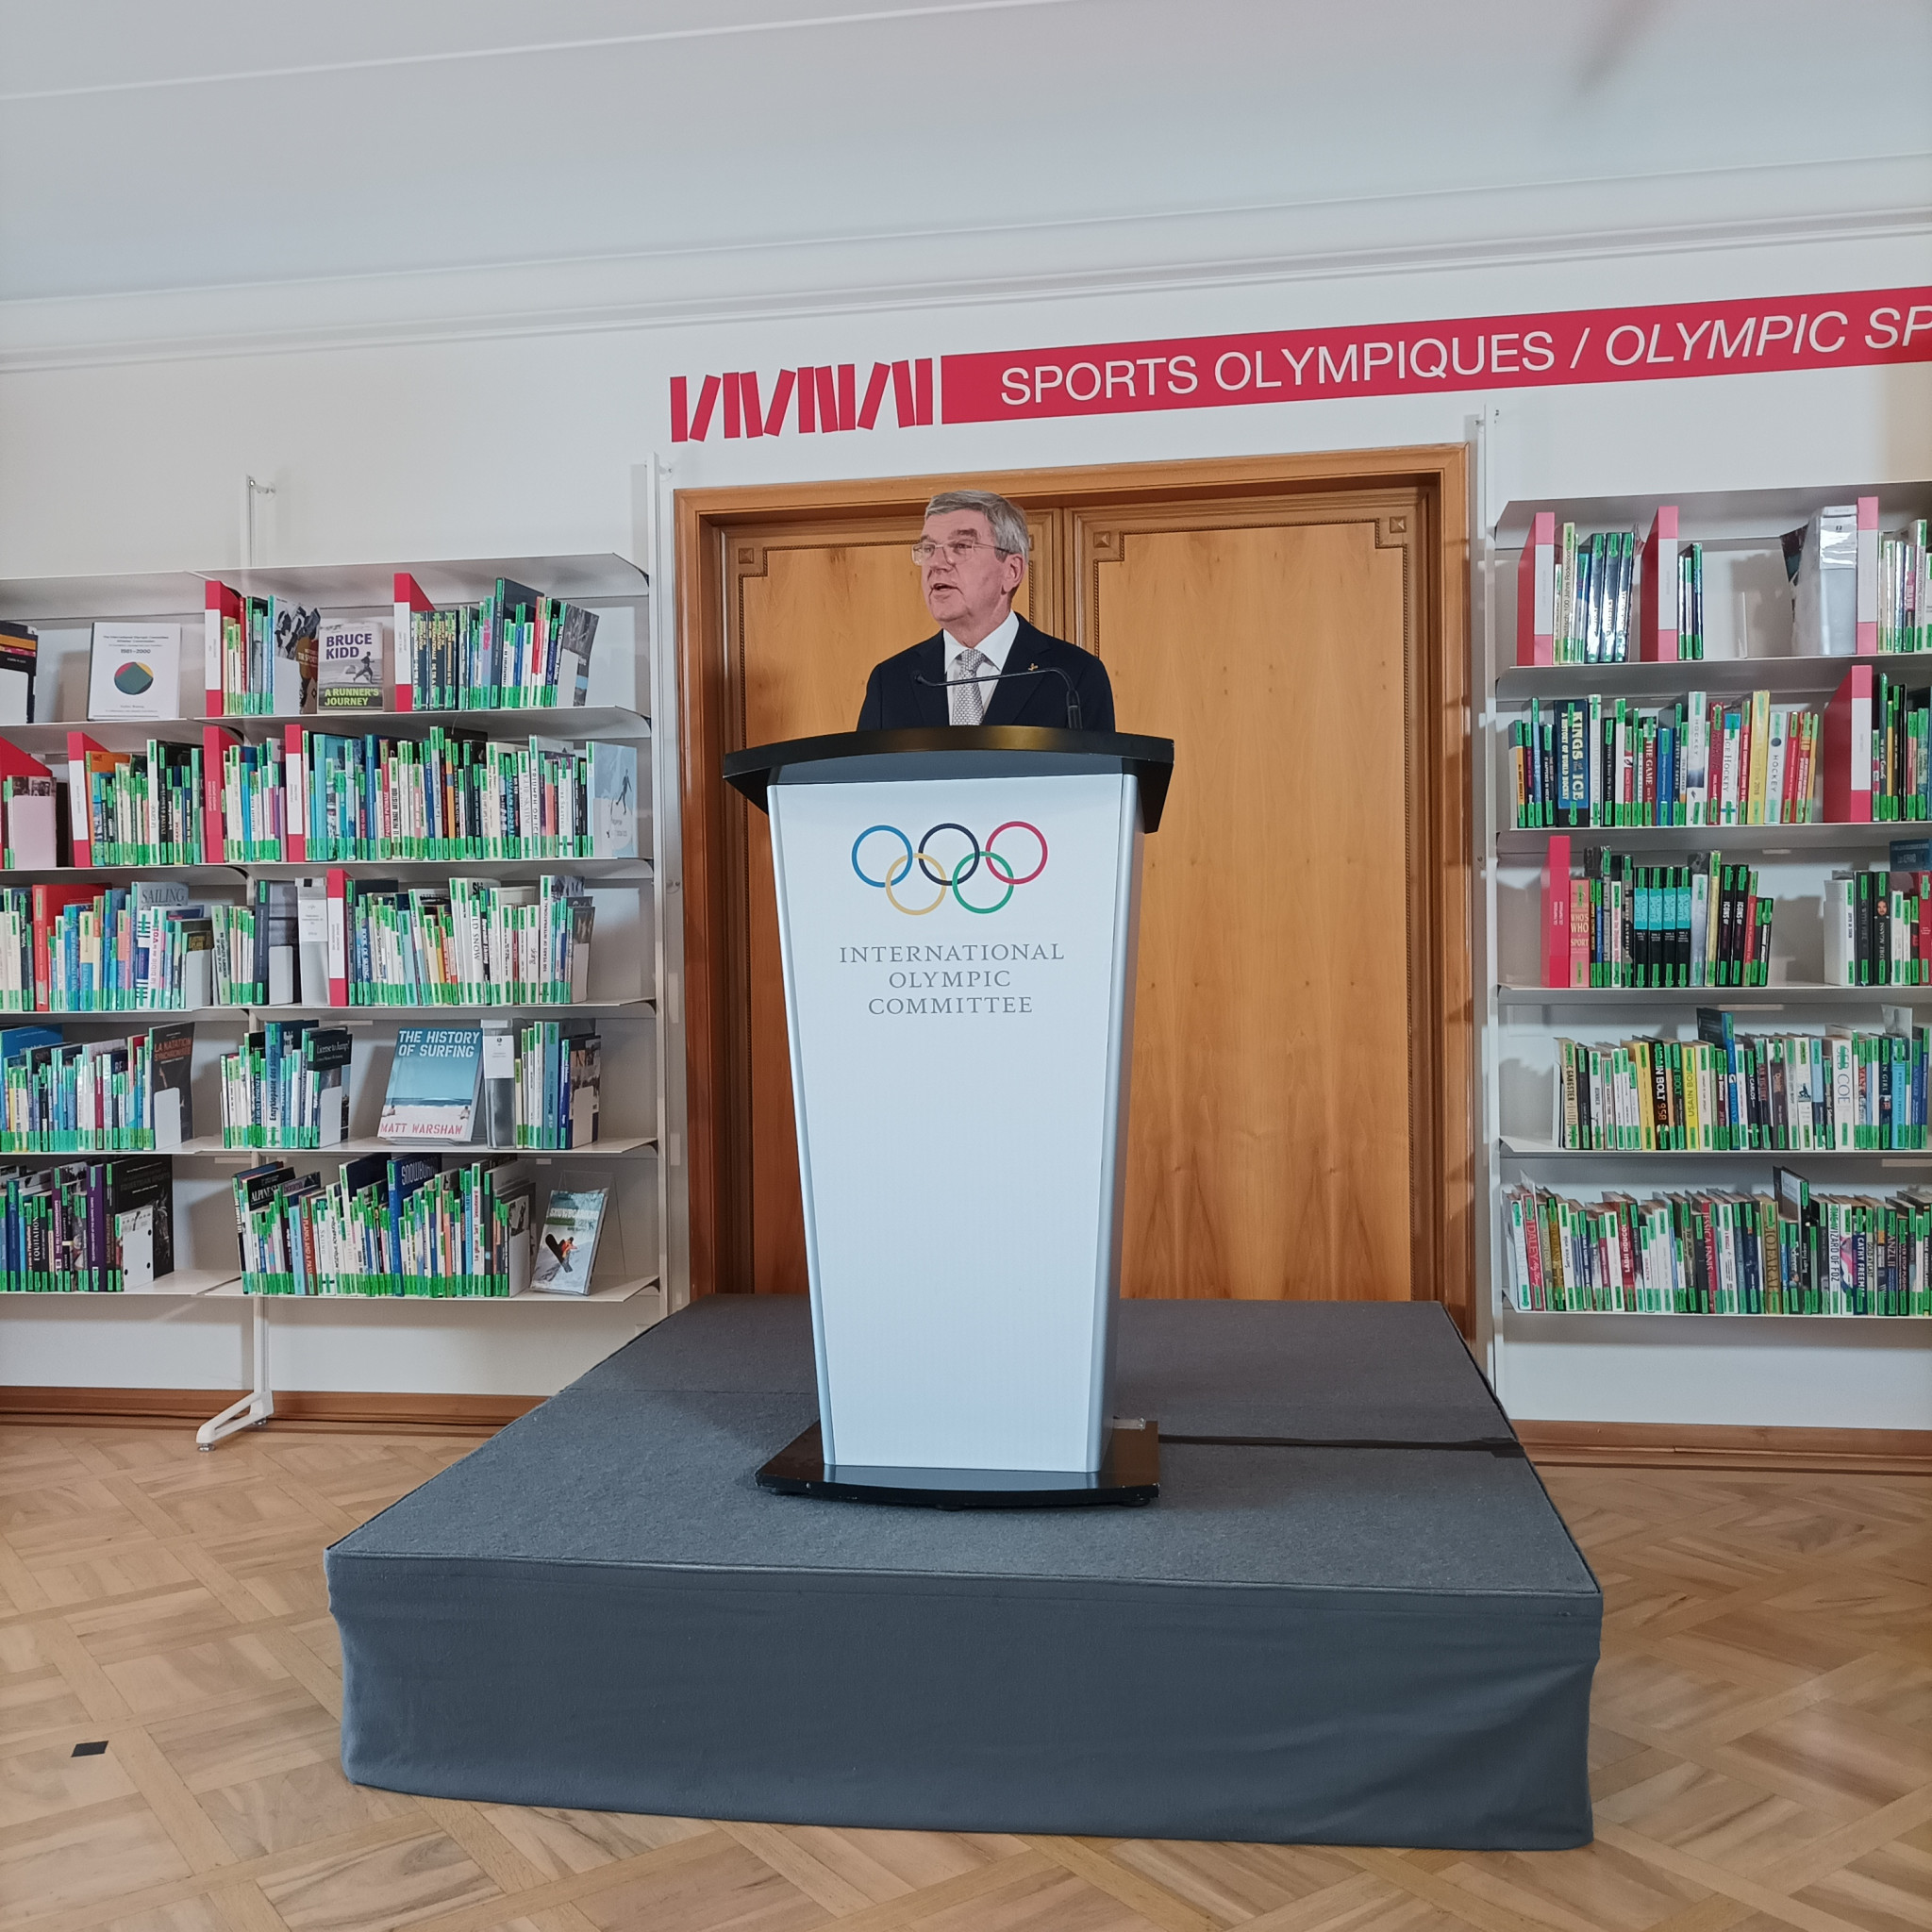 IOC President Thomas Bach has said that the Olympic Studies Centre plays a vital role in promoting Olympic values ©ITG